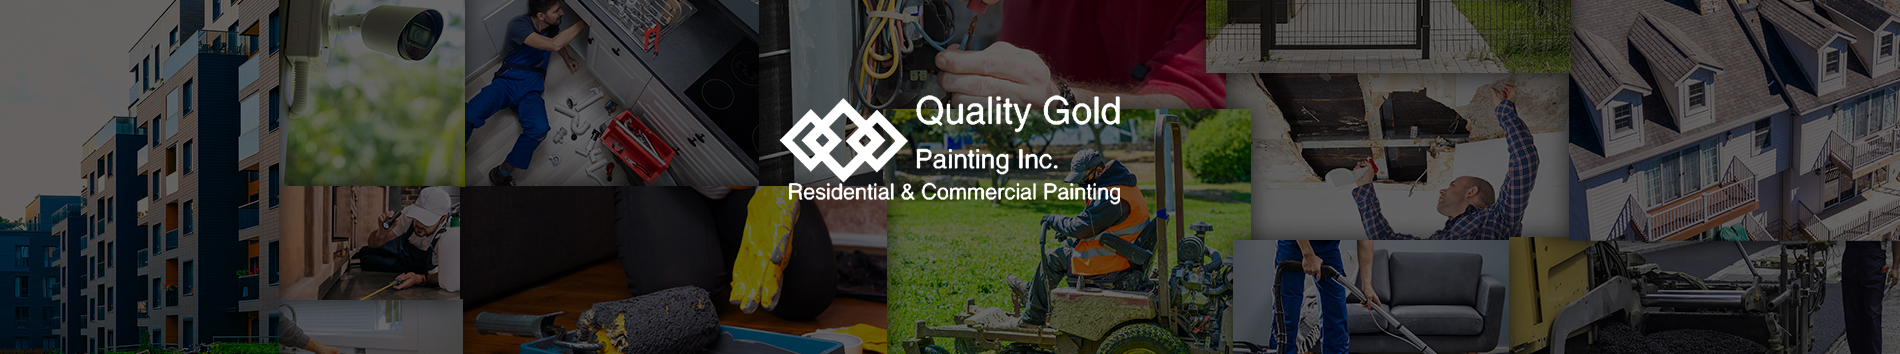 Quality Gold Painting Inc